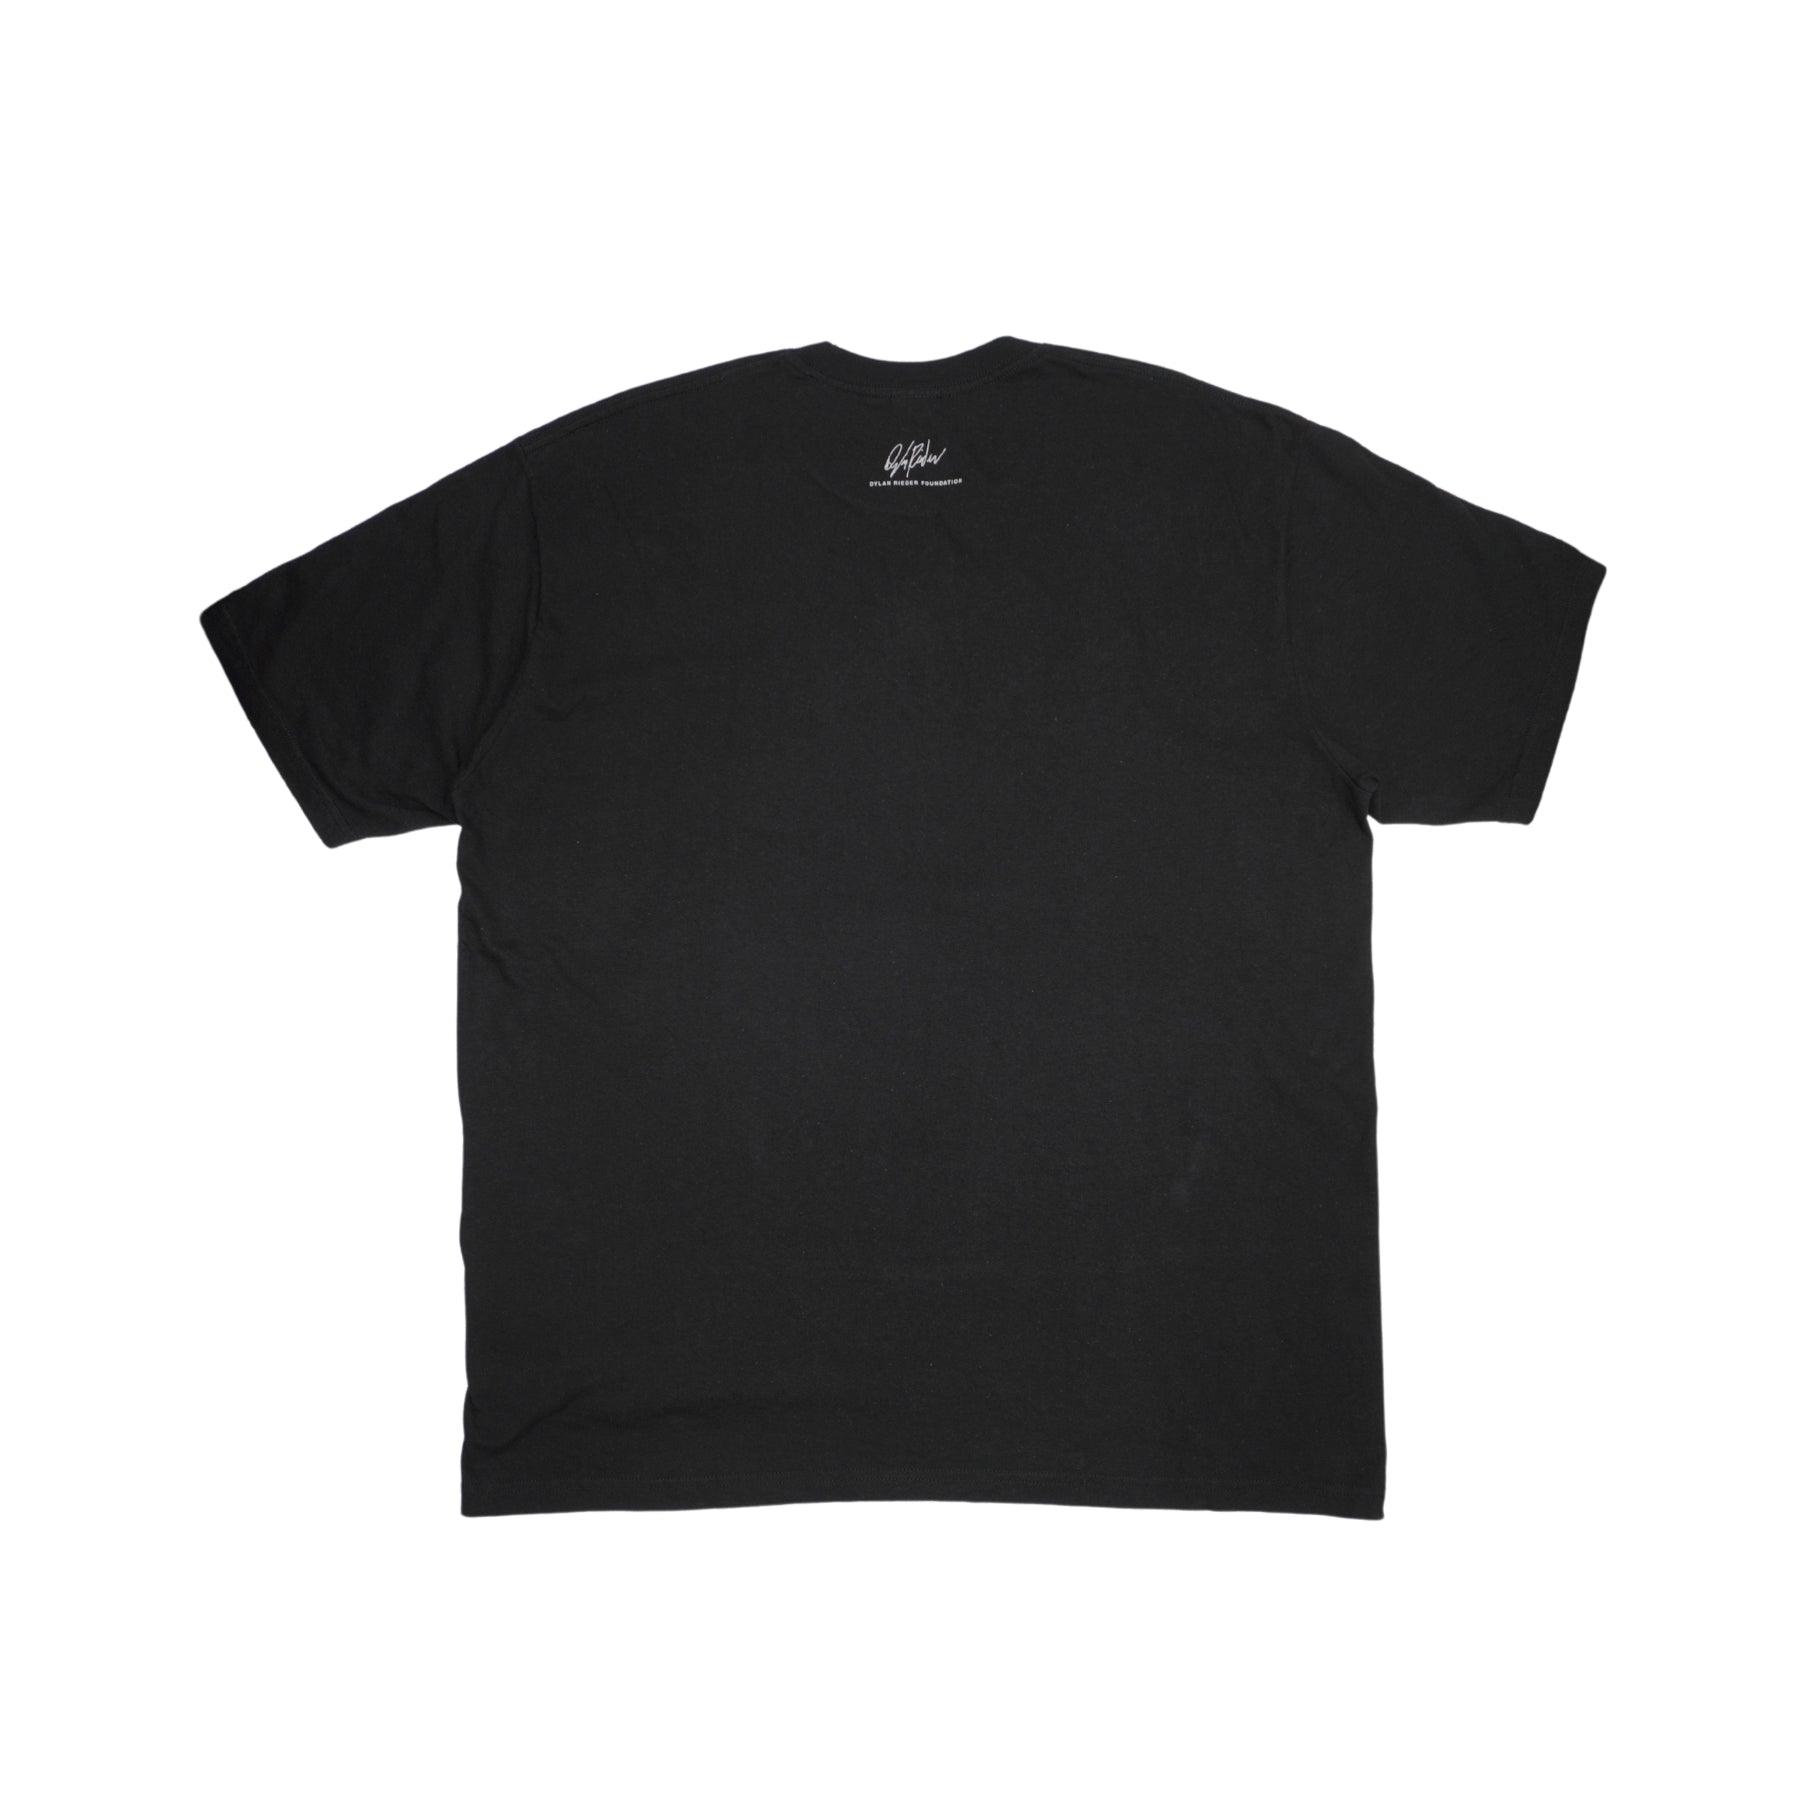 Supreme 'Dylan' T-Shirt - Men's XL - Fashionably Yours